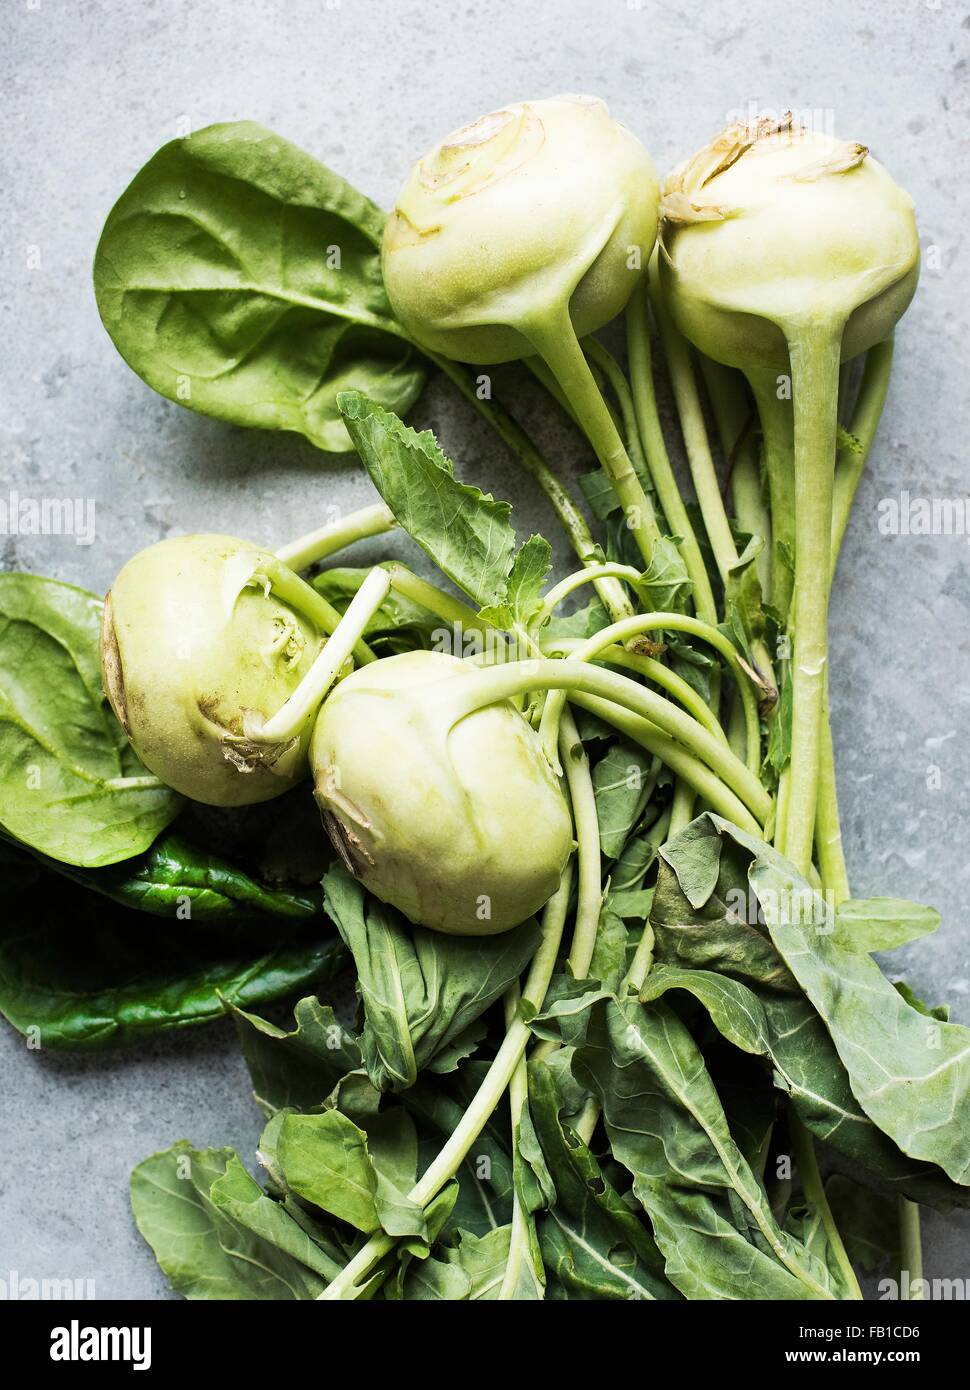 Overhead view of kohlrabi with leaves Stock Photo